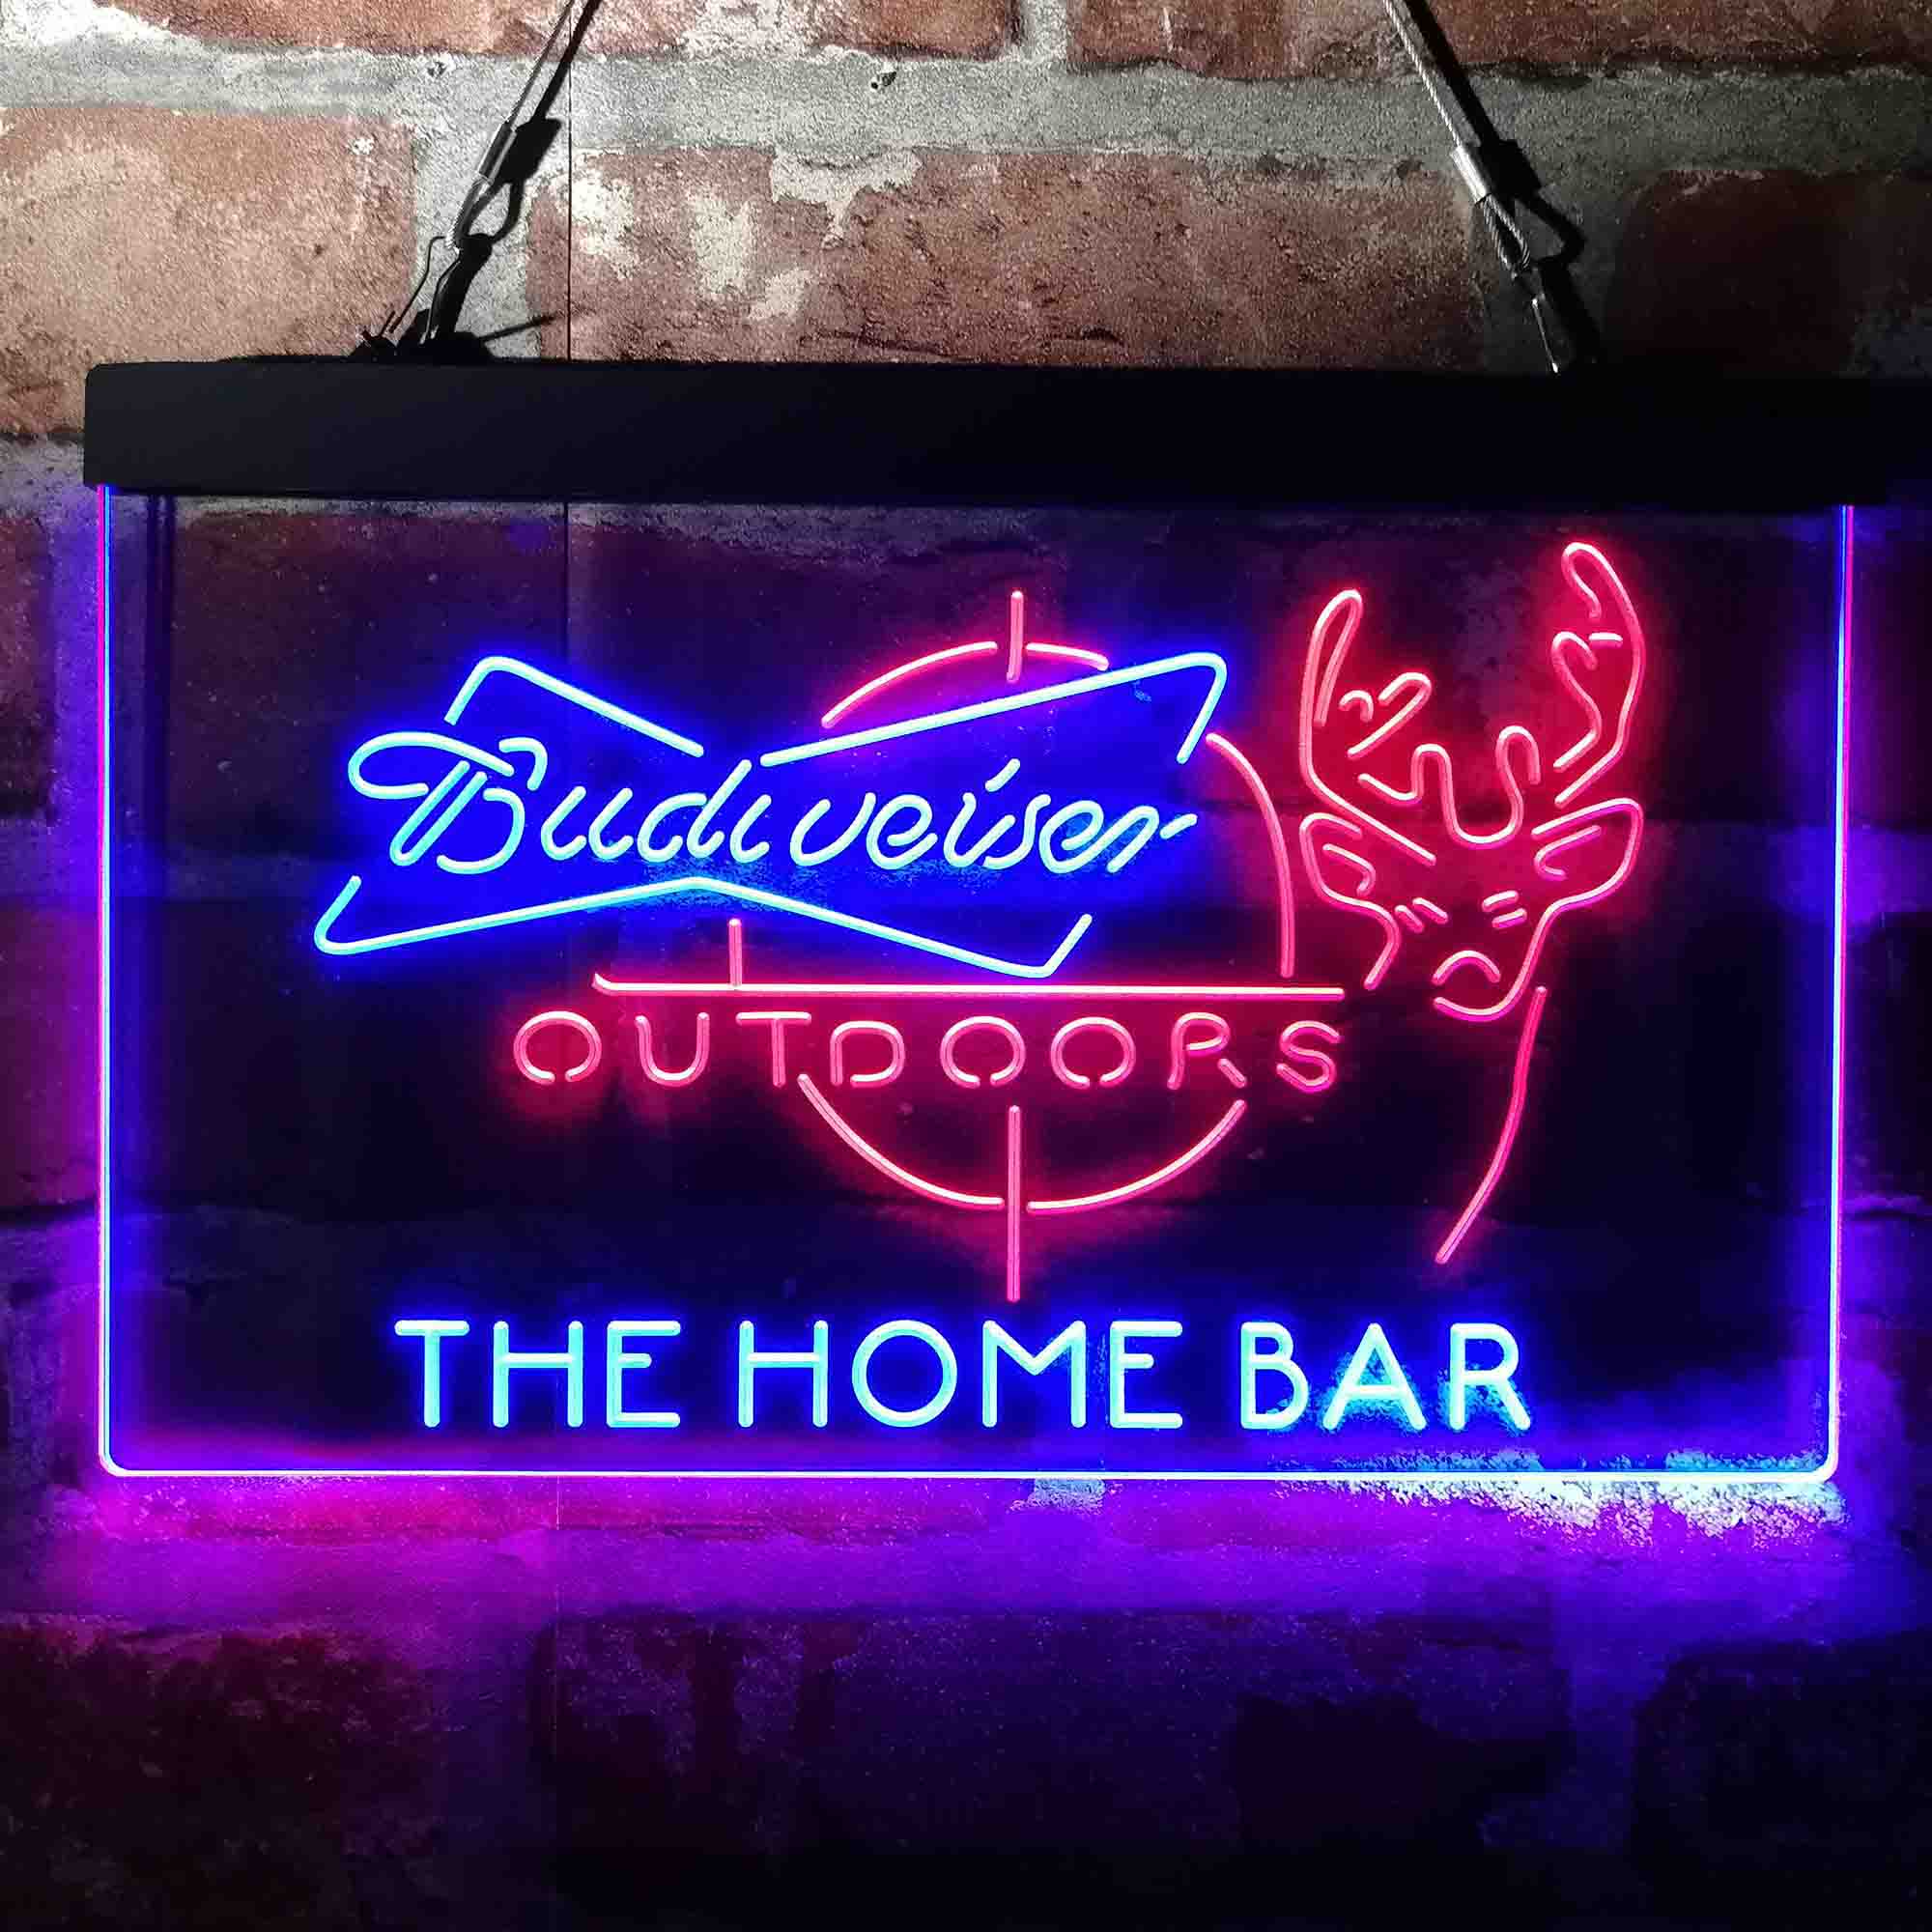 Personalized Budweiser Beer Bar Neon-Like LED Sign - Custom Wall Decor Gift